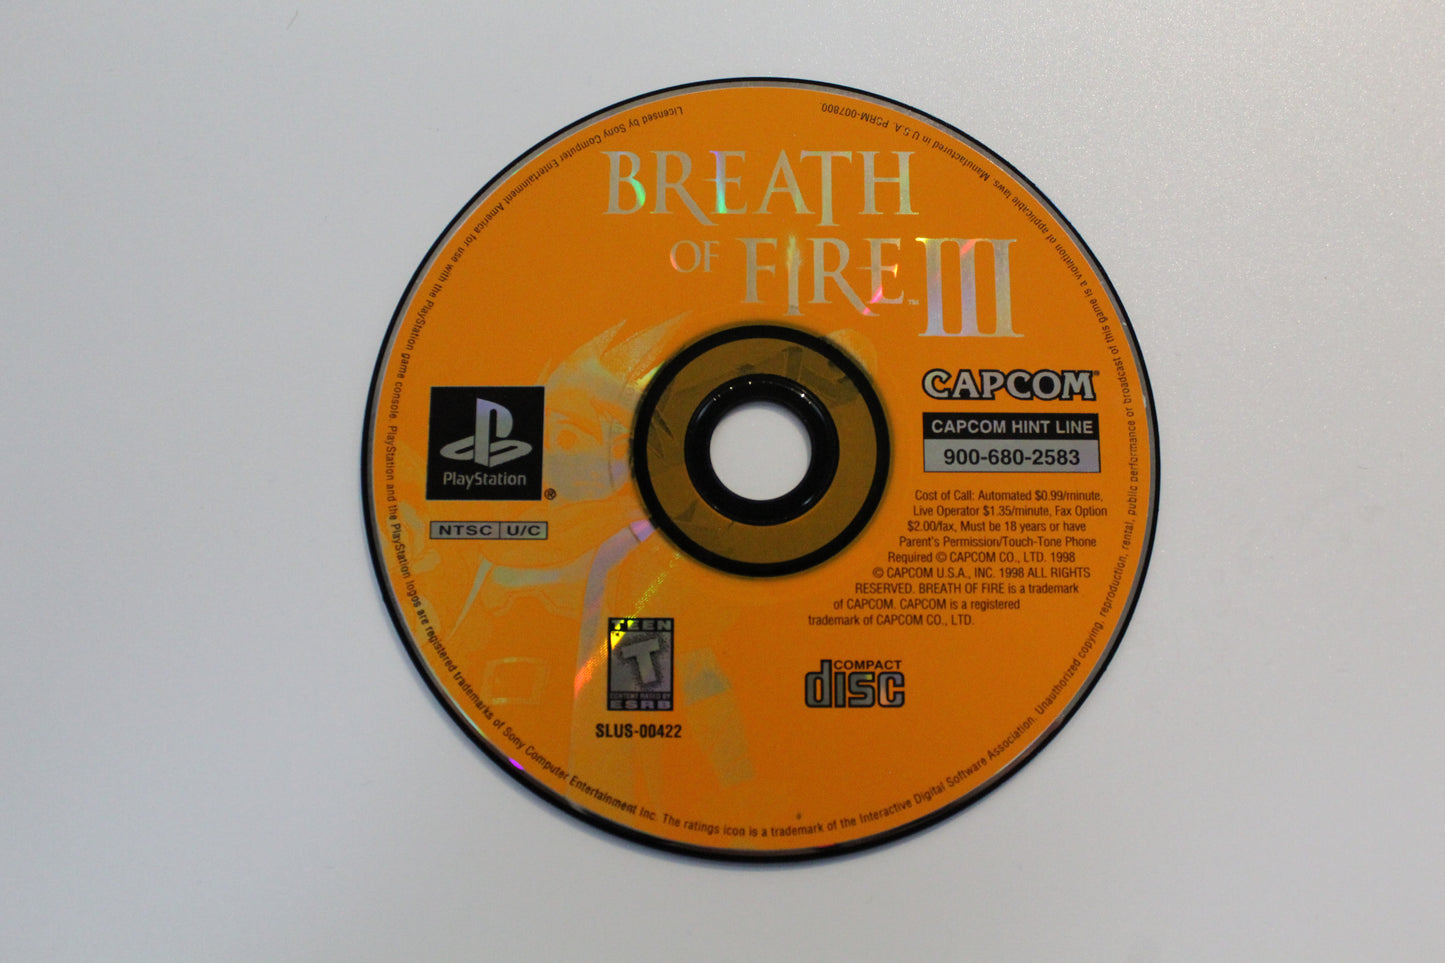 Breath of Fire 3 Disk only for the PlayStation (tested)